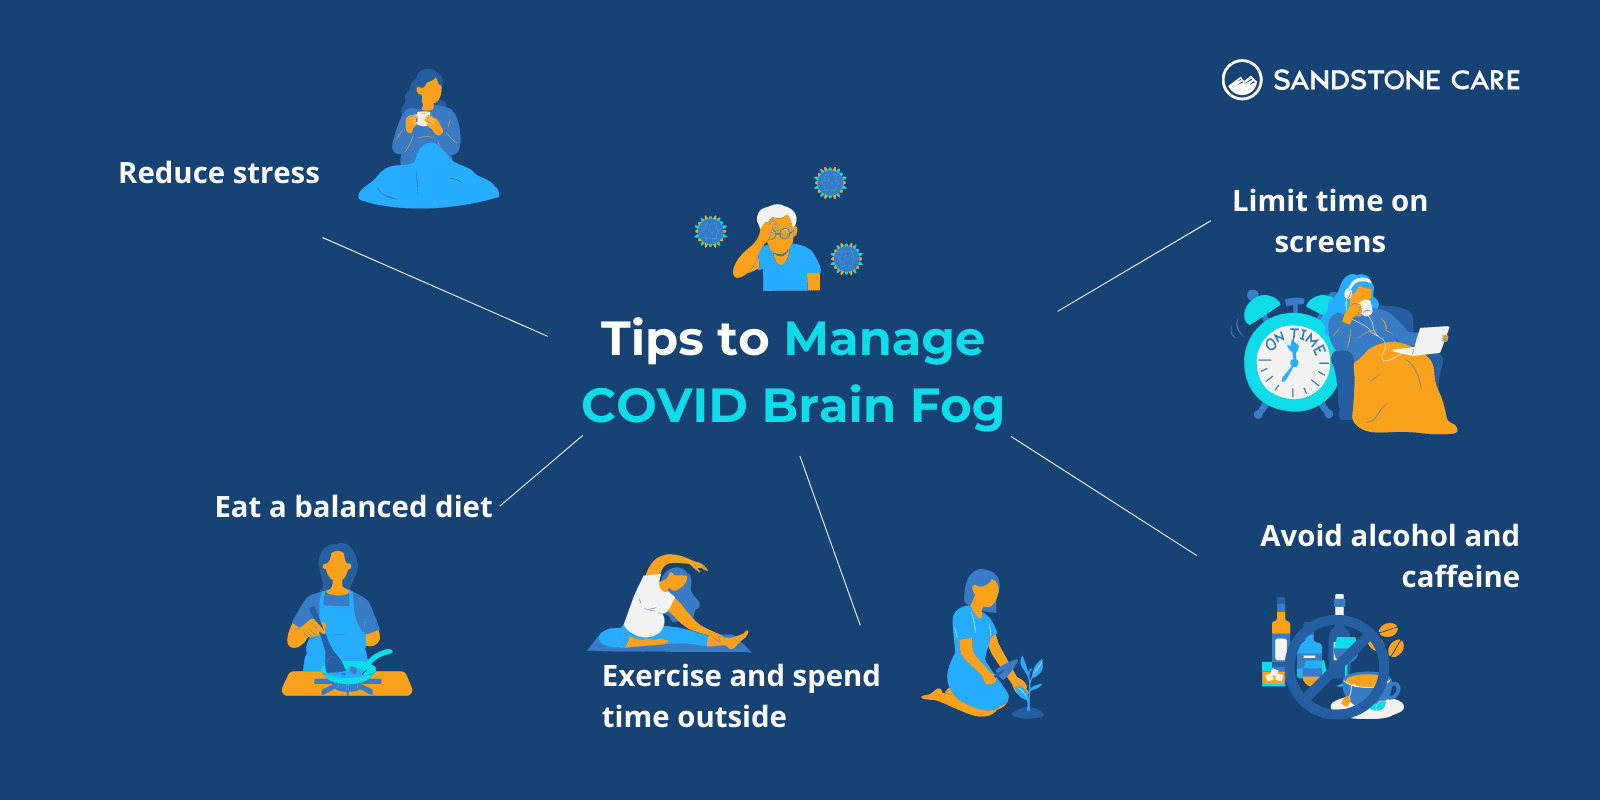 5 Tips to manage brain fog from covid listed out with relevant illustrations